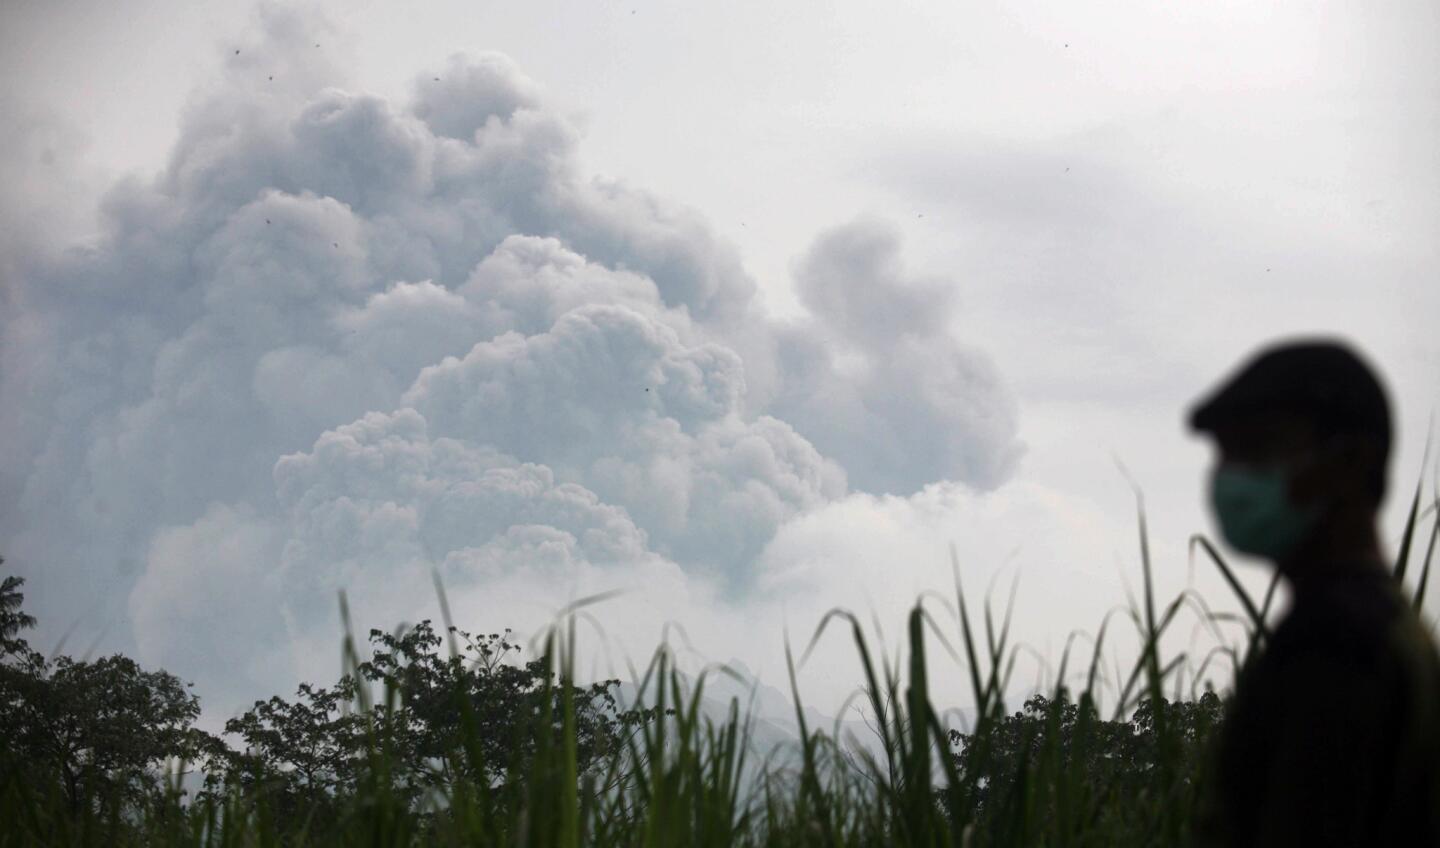 A man watches from Mbaladak village as Mt. Kelud erupts.